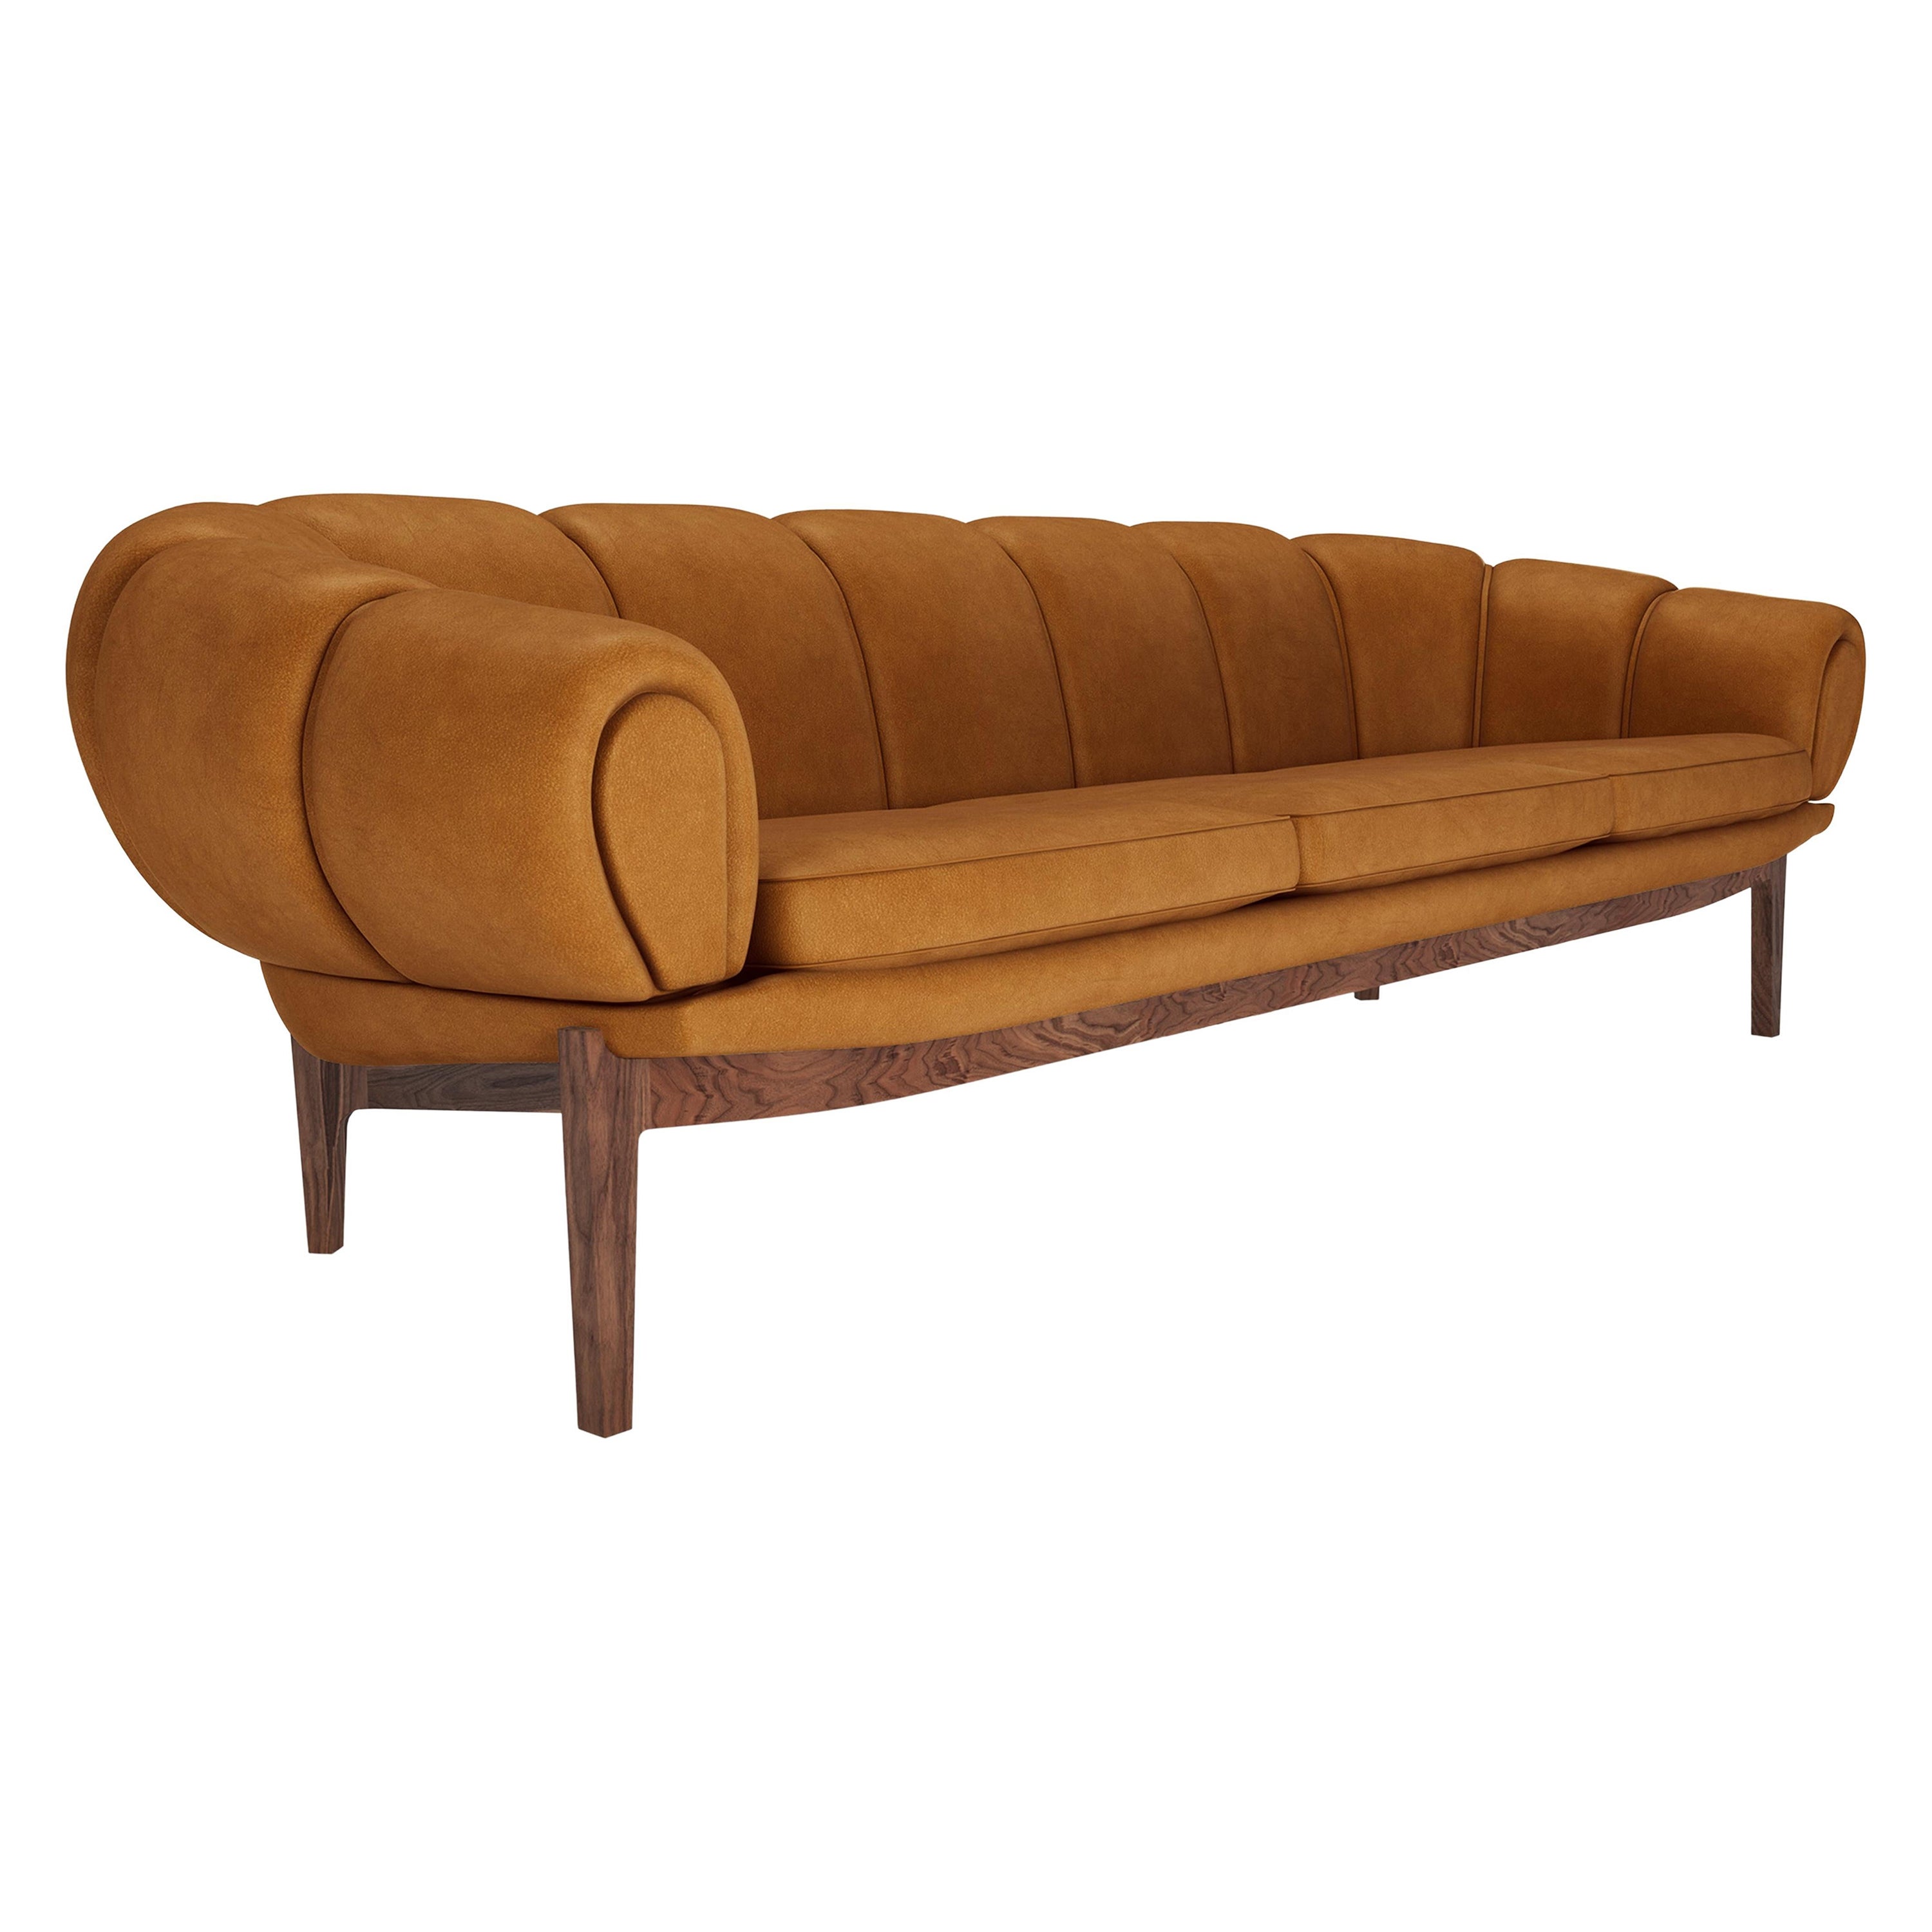 Leather 'Croissant' Sofa by Illum Wikkelsø for Gubi with Walnut Legs For Sale